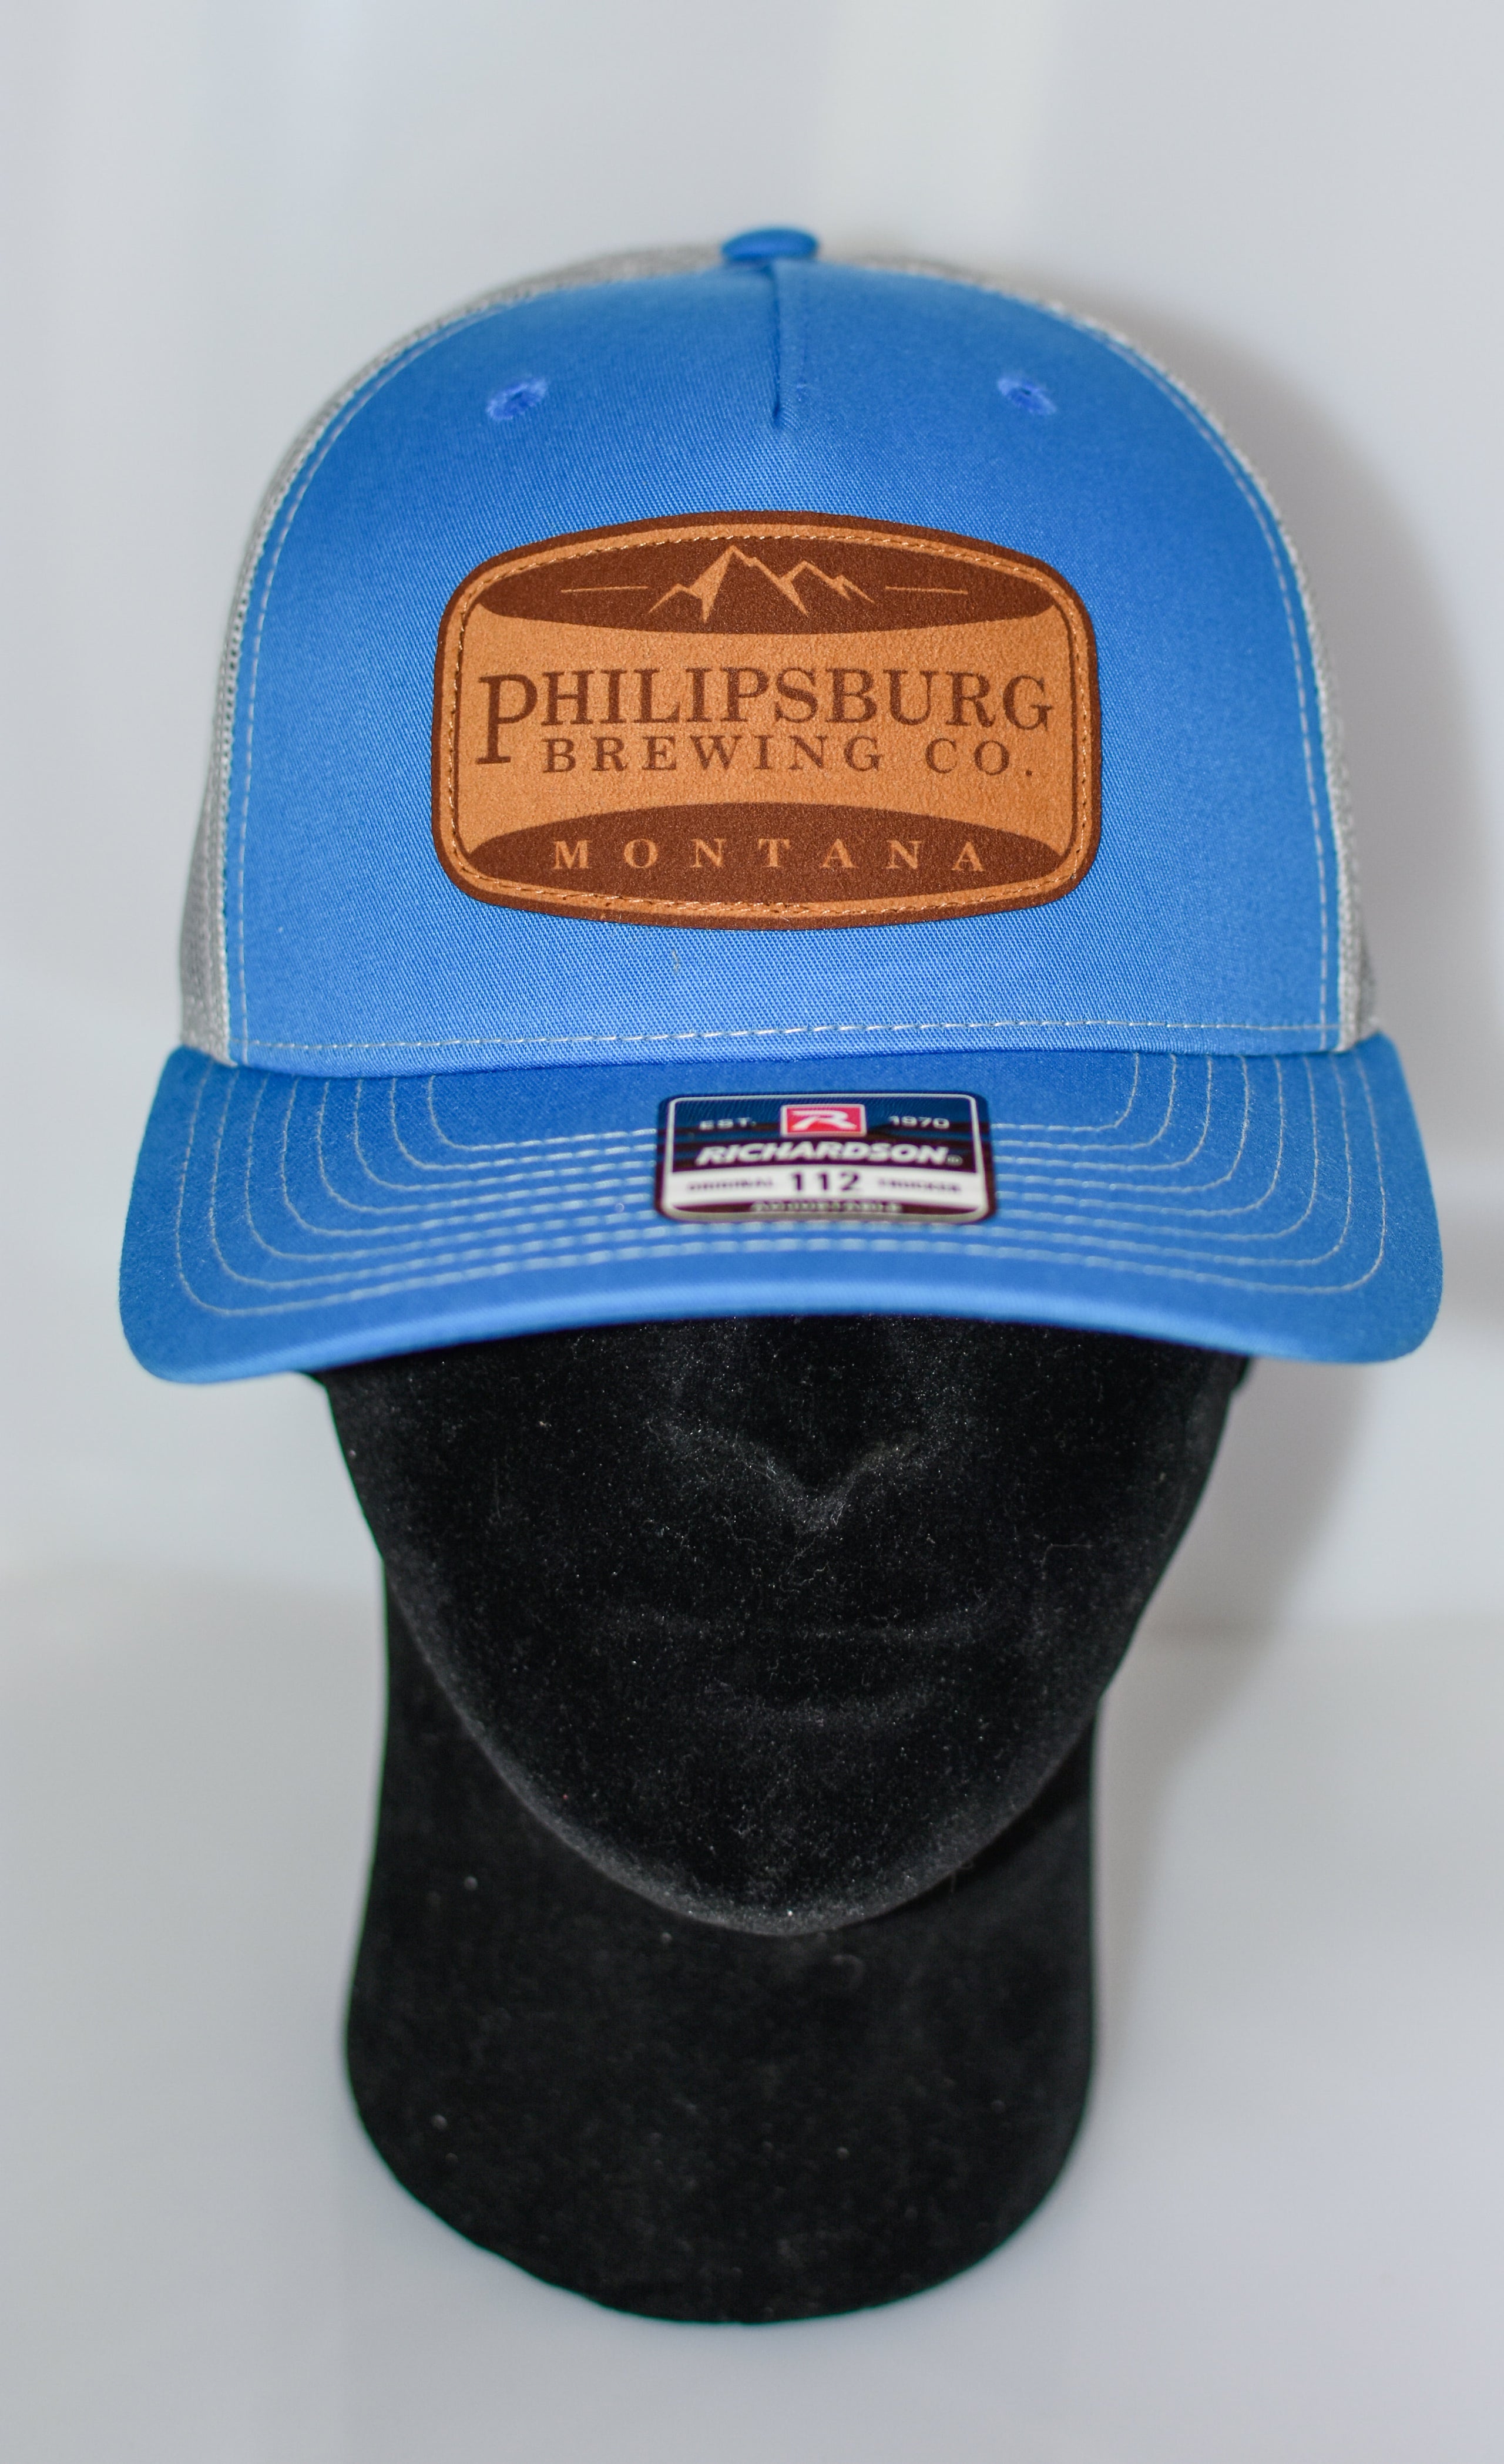 Philipsburg with Flexfit Brewing Trucker Suede Company Patch